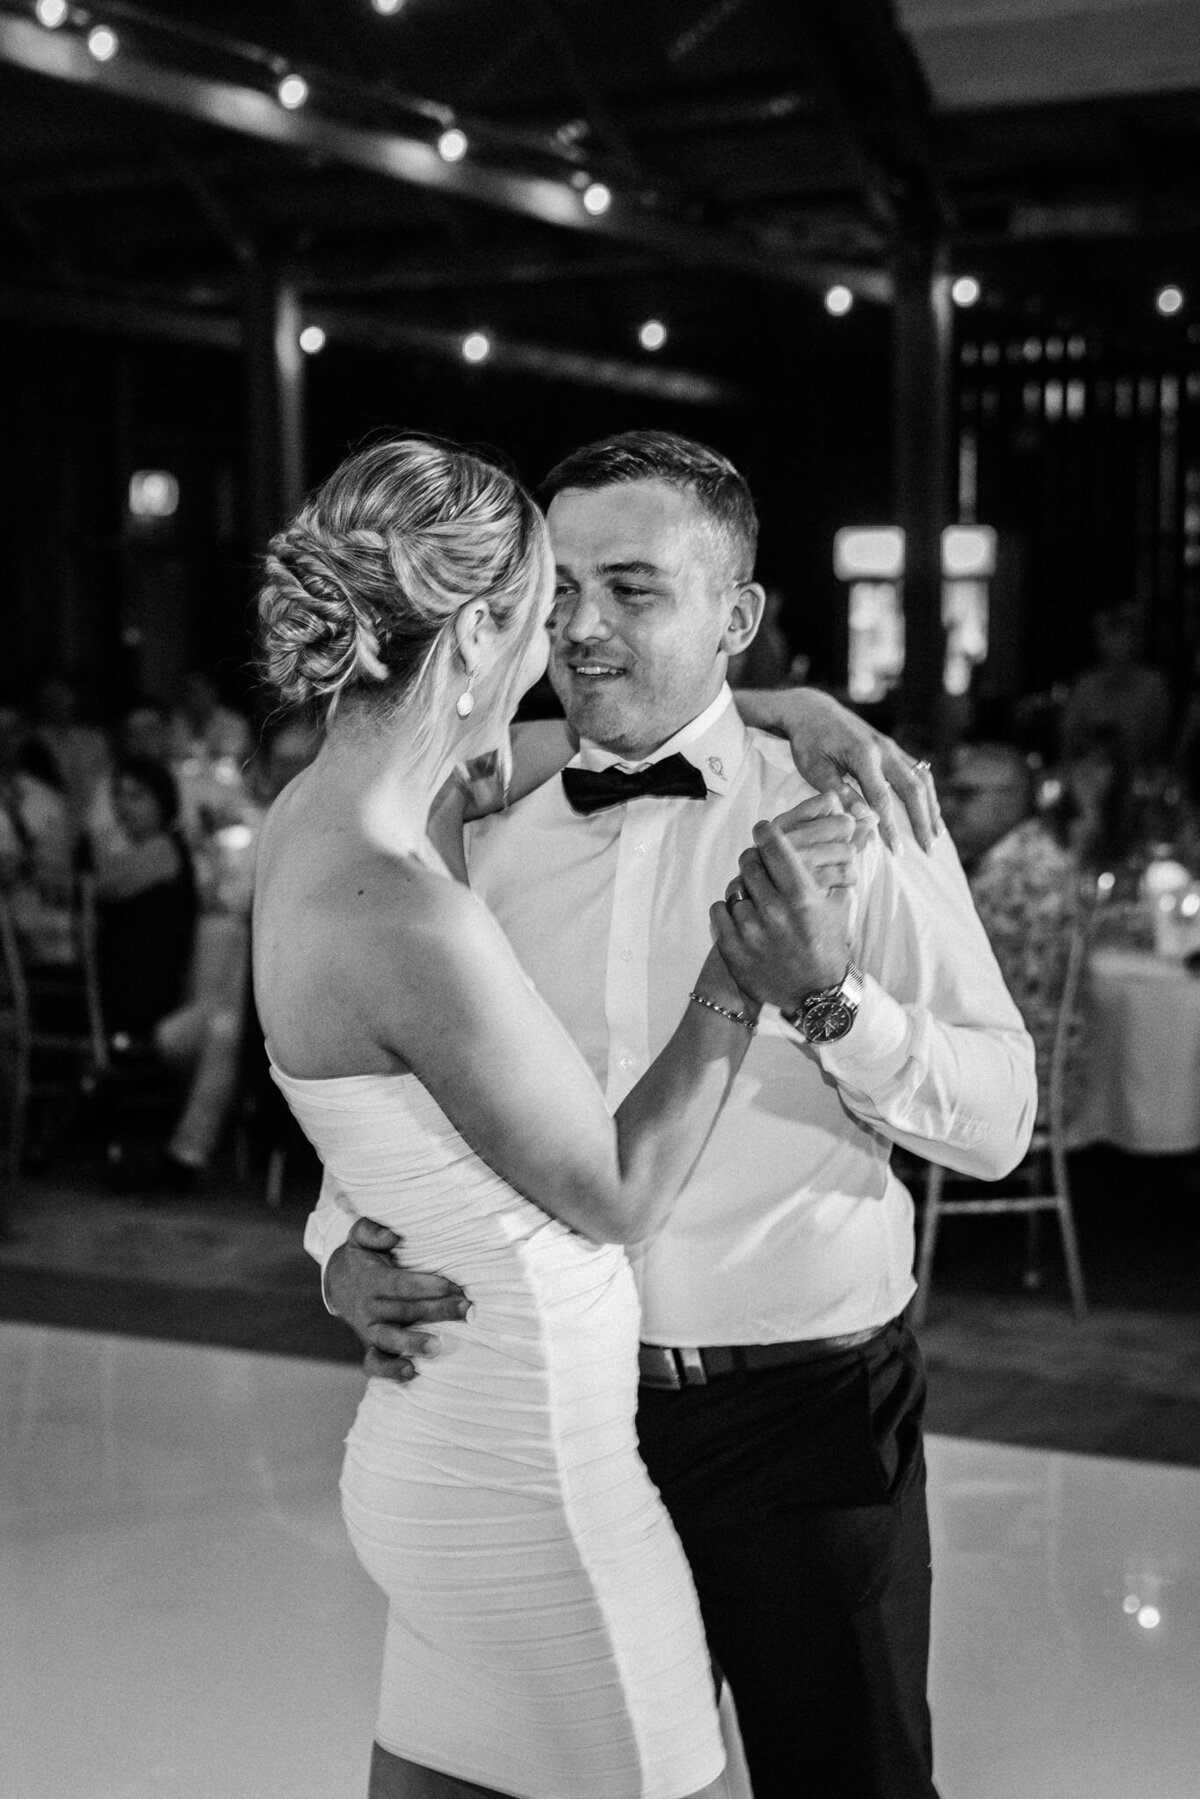 Emily & Ben's first dance as newly wed couple